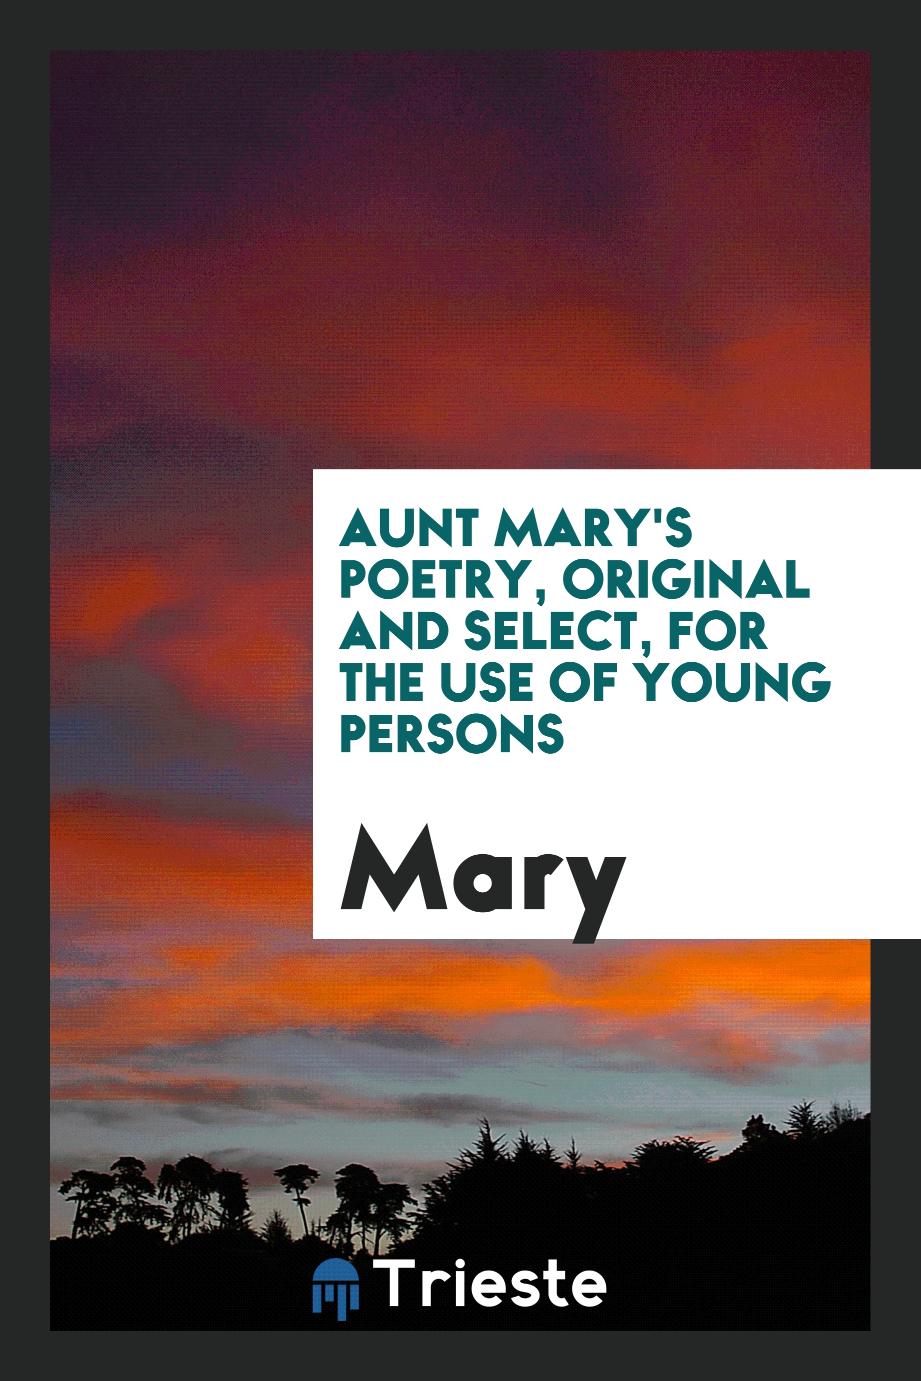 Aunt Mary's Poetry, Original and Select, for the Use of Young Persons